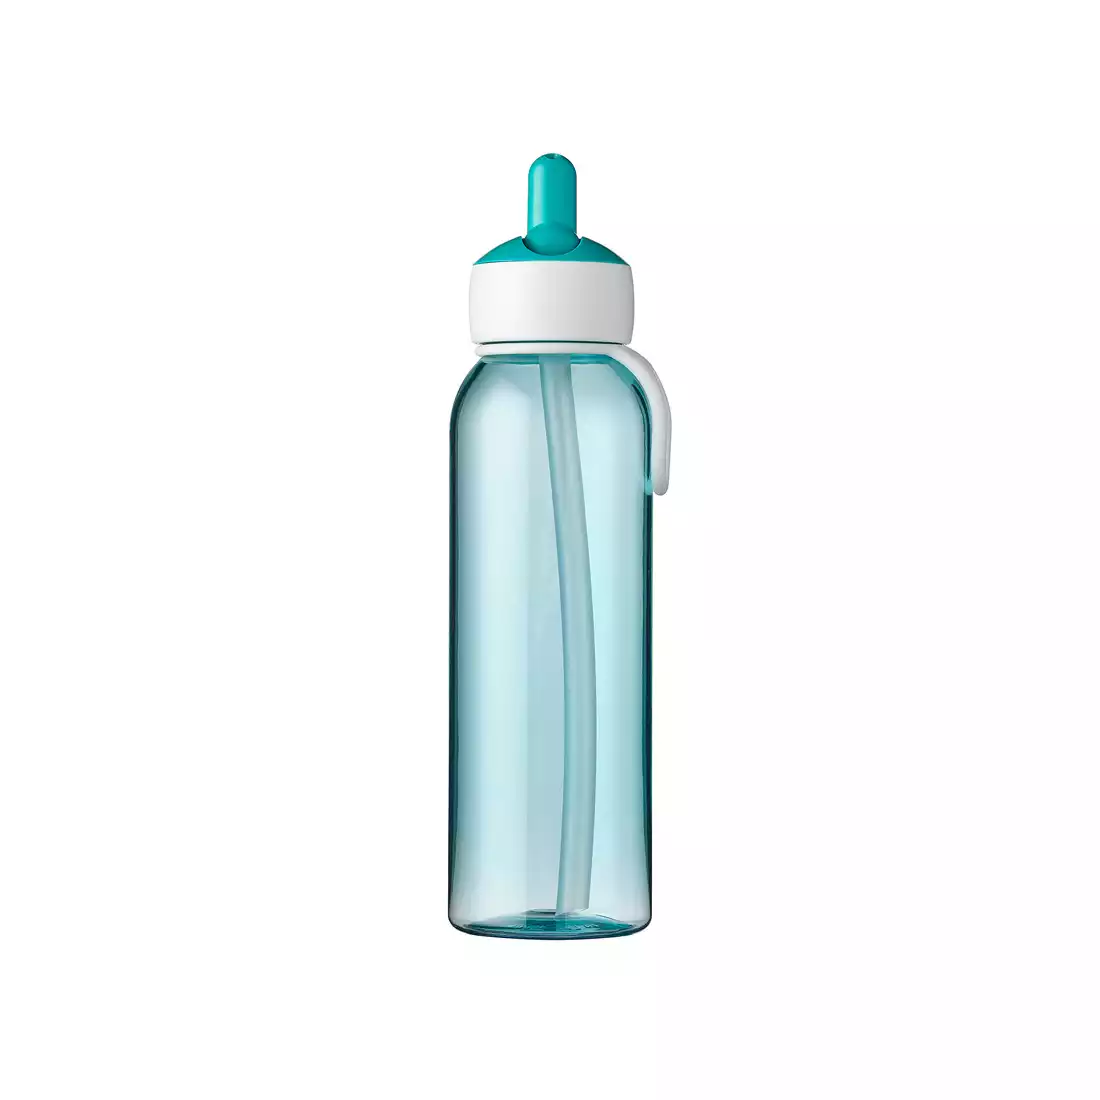 MEPAL FLIP-UP CAMPUS 500 ml water bottle, turquoise